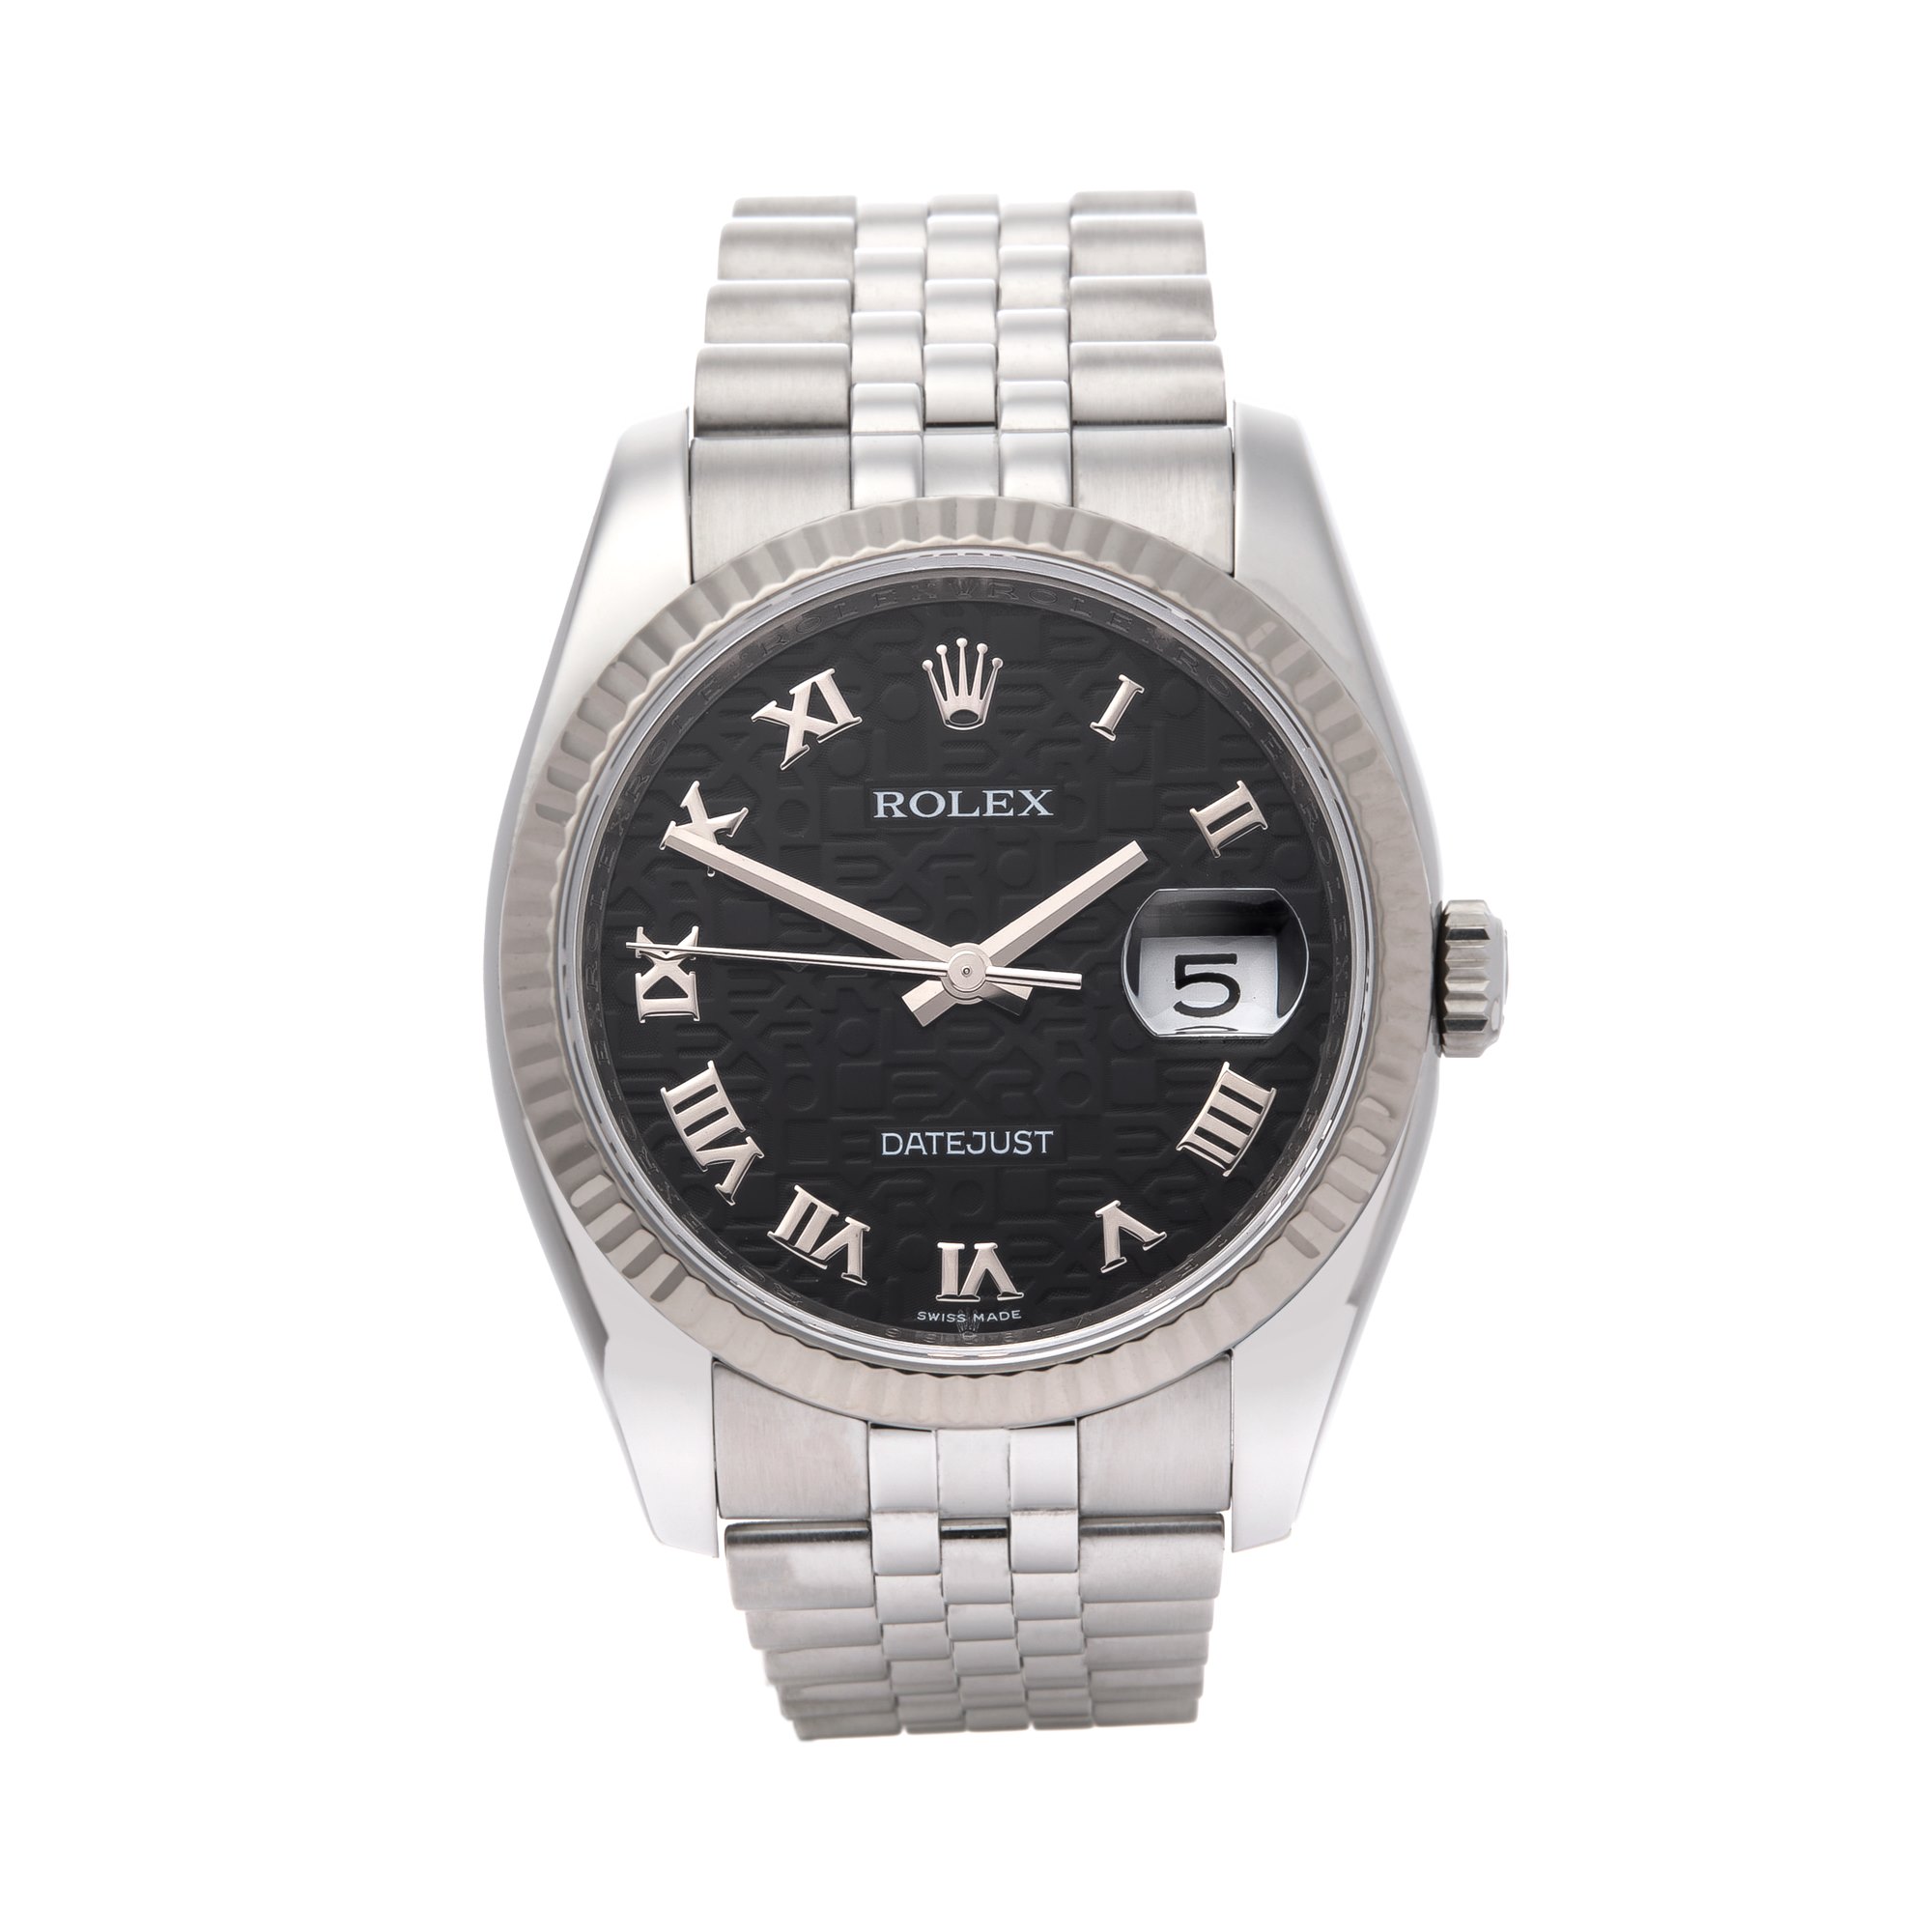 Rolex Datejust 36 White Gold & Stainless Steel 116234